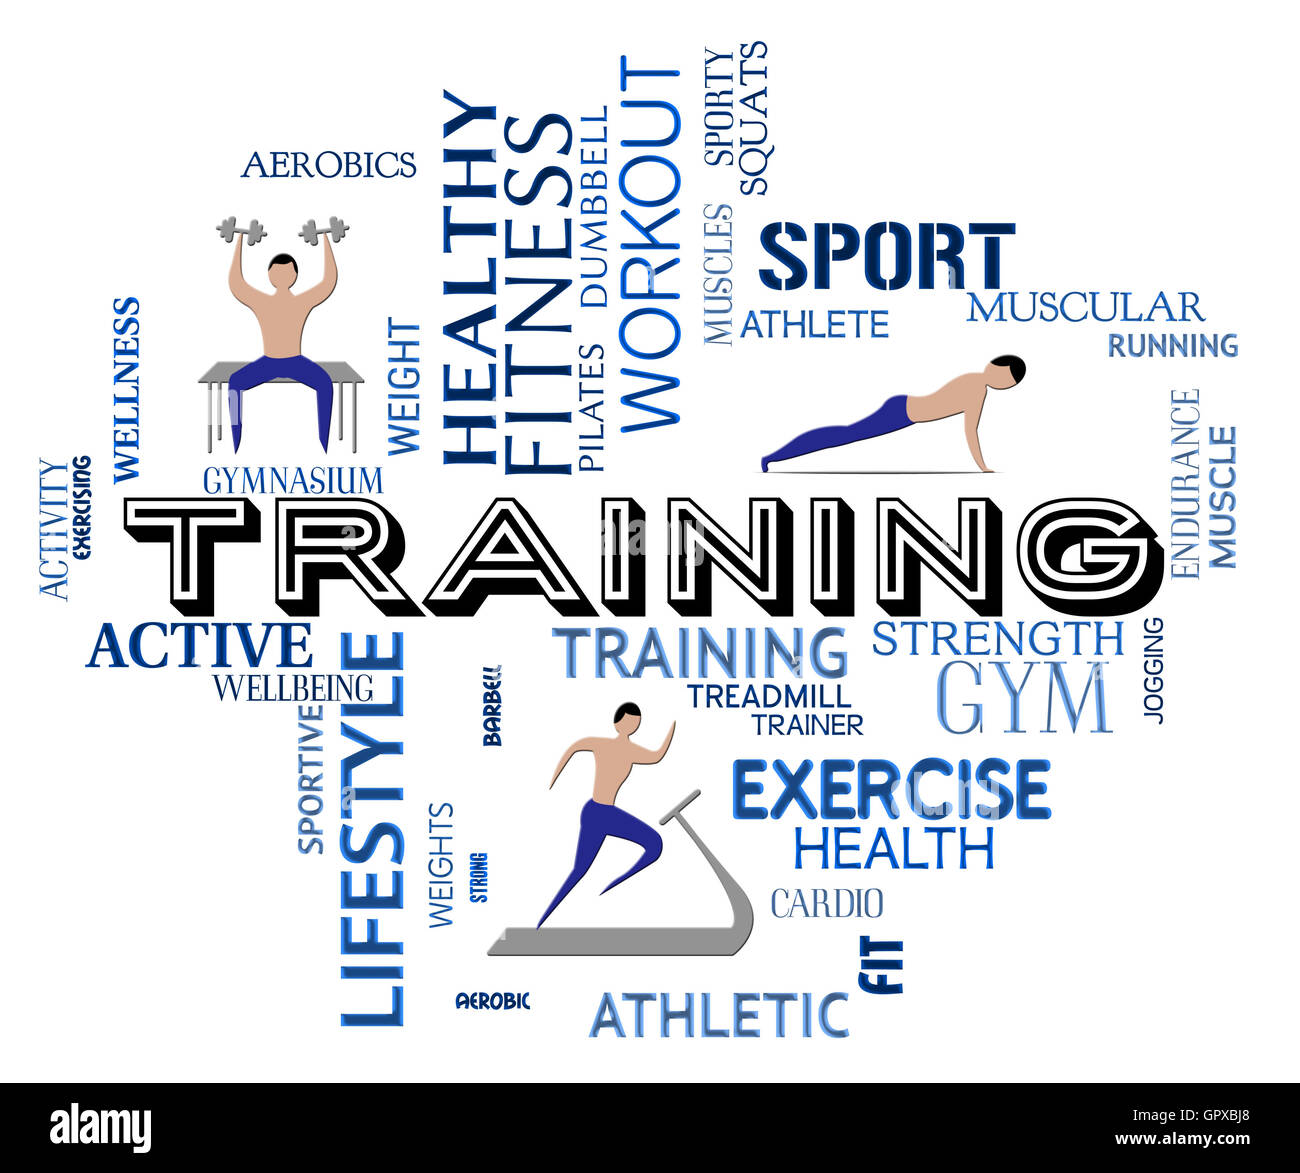 Fitness Training Meaning Work Out And Healthy Stock Photo - Alamy